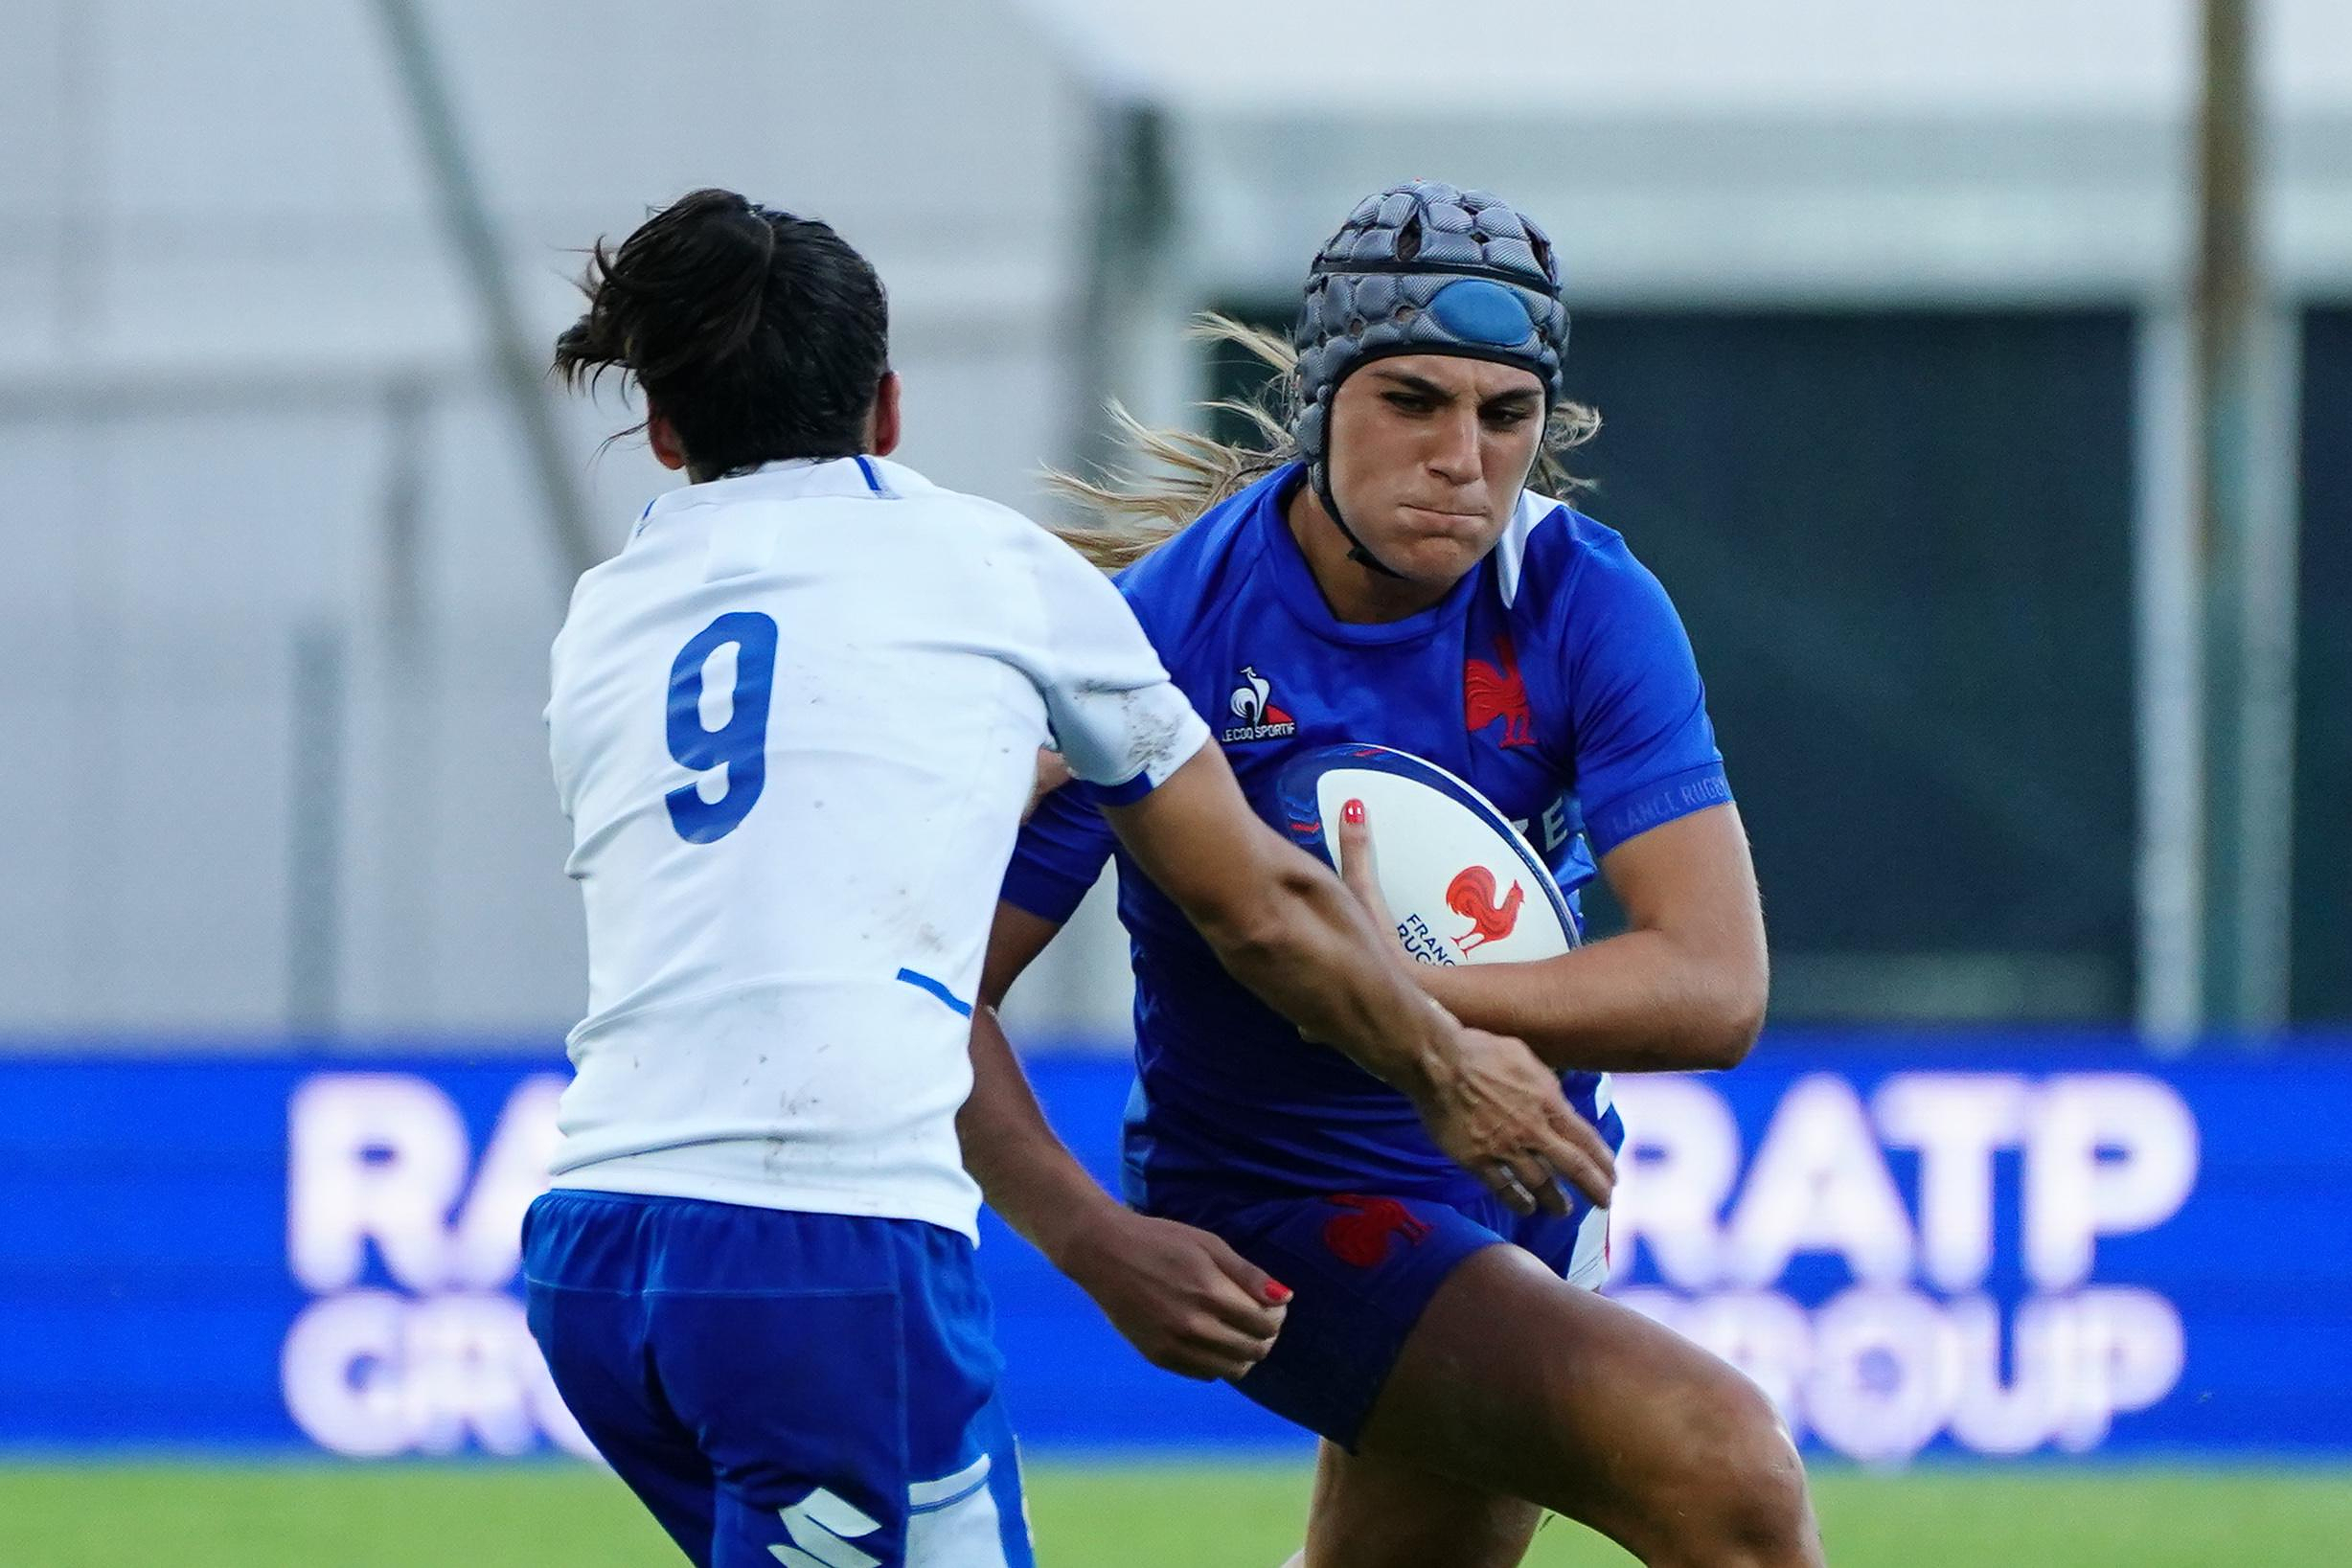 Six Nations (F): Mélissande Llorens returns to face Italy with the Blues